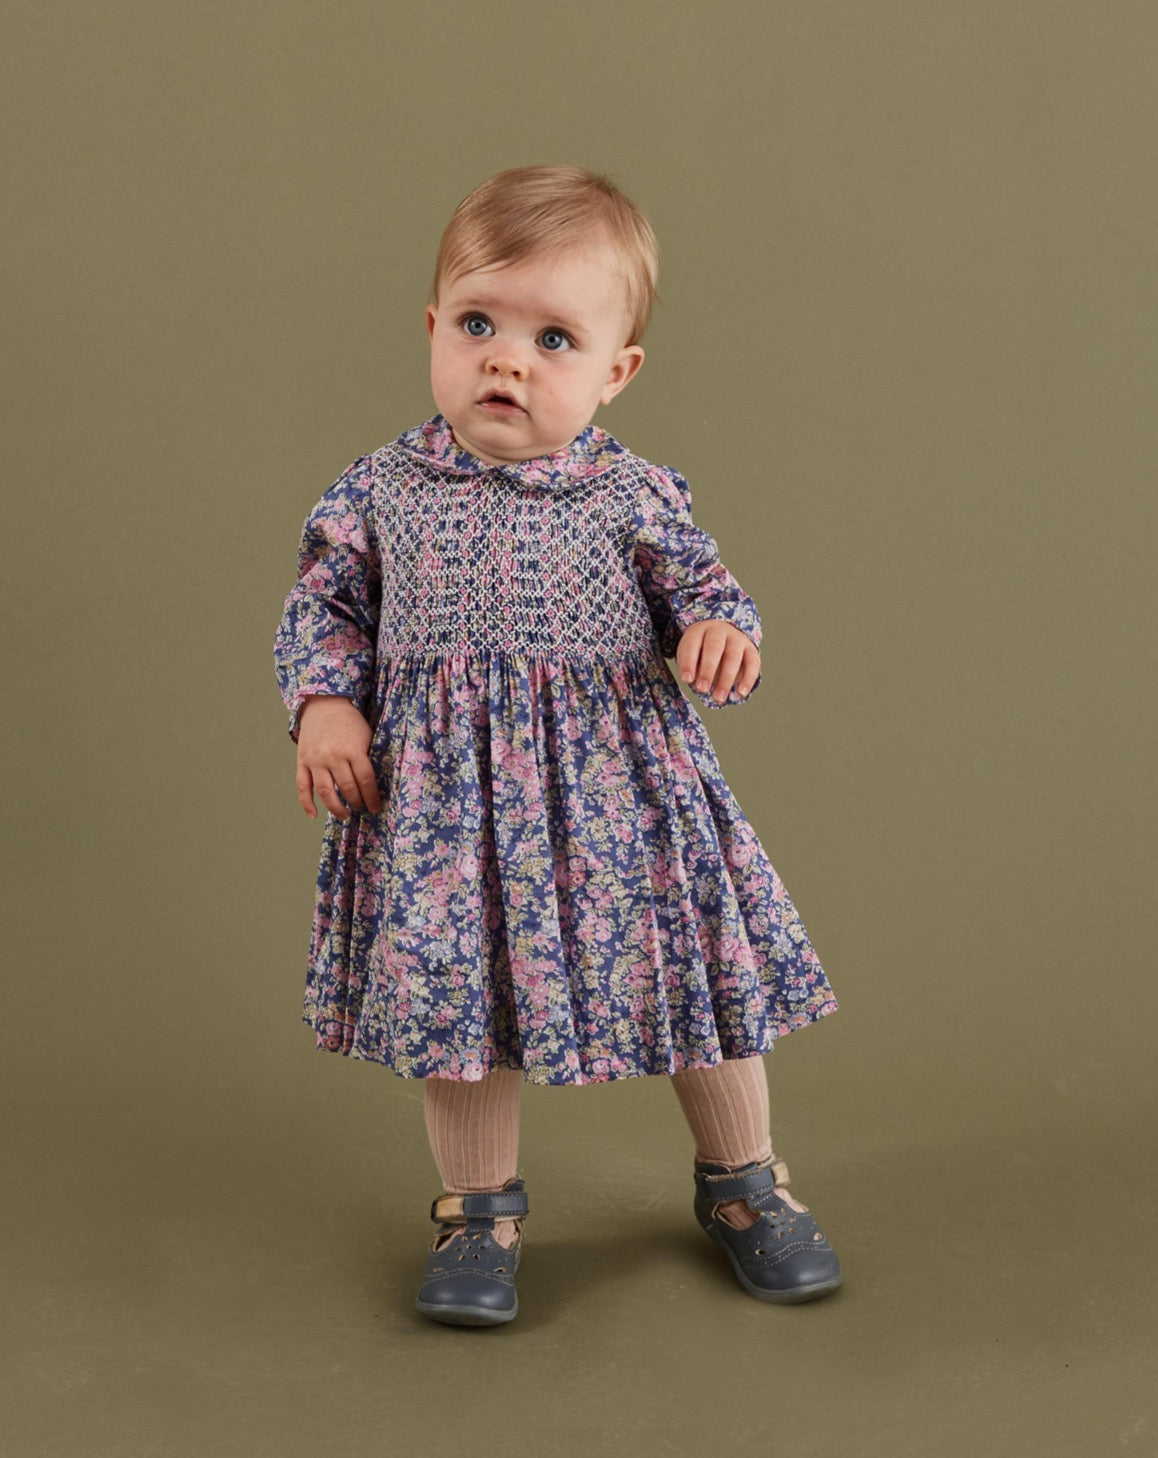 baby girl wearing a floral smocked dress